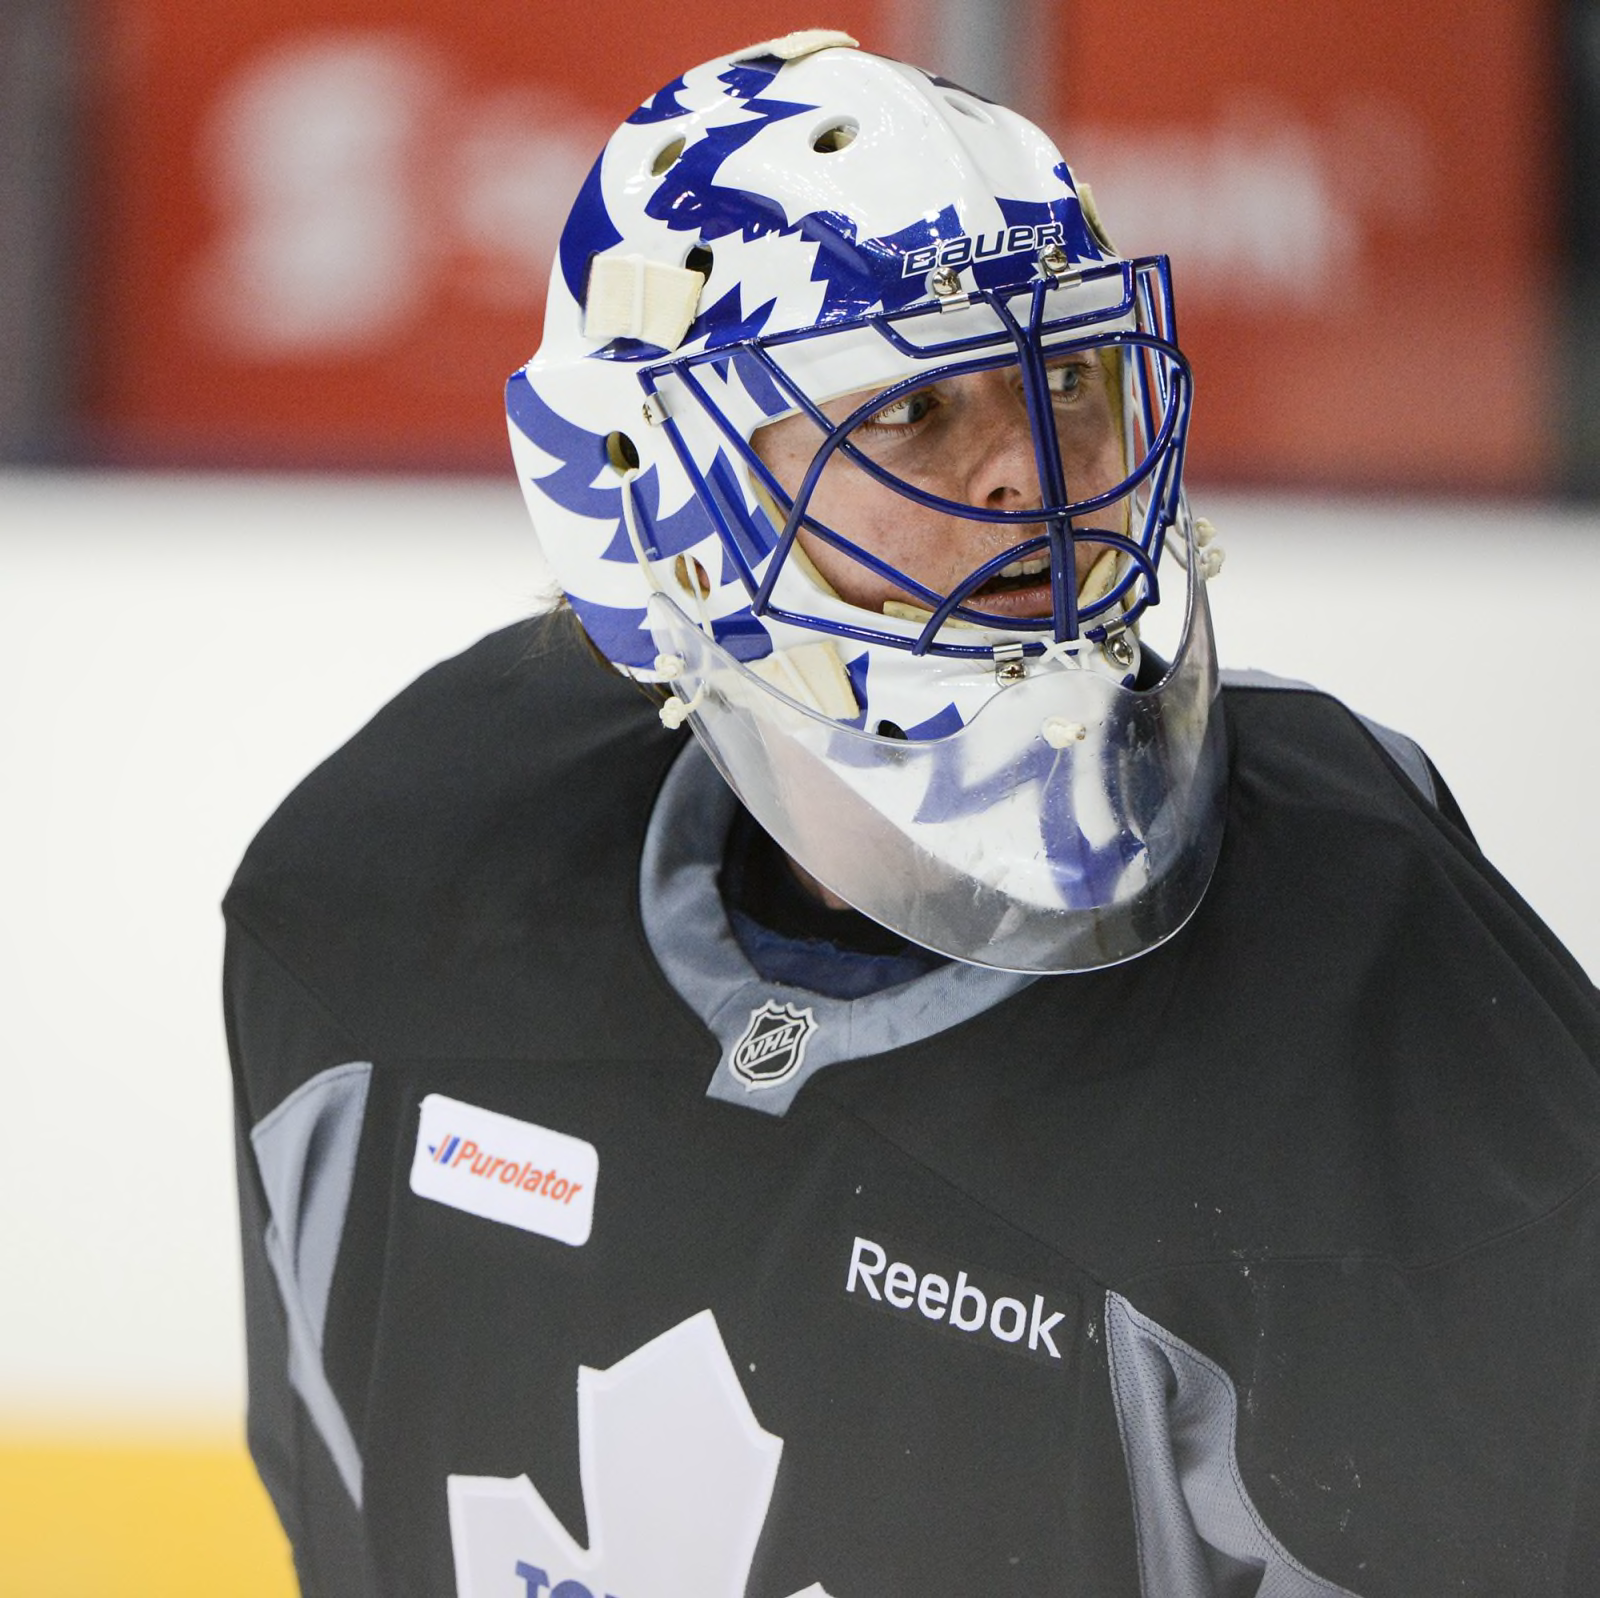 Top 5 Best Looking Toronto Maple Leafs Goalie Masks of All-Time - Page 5